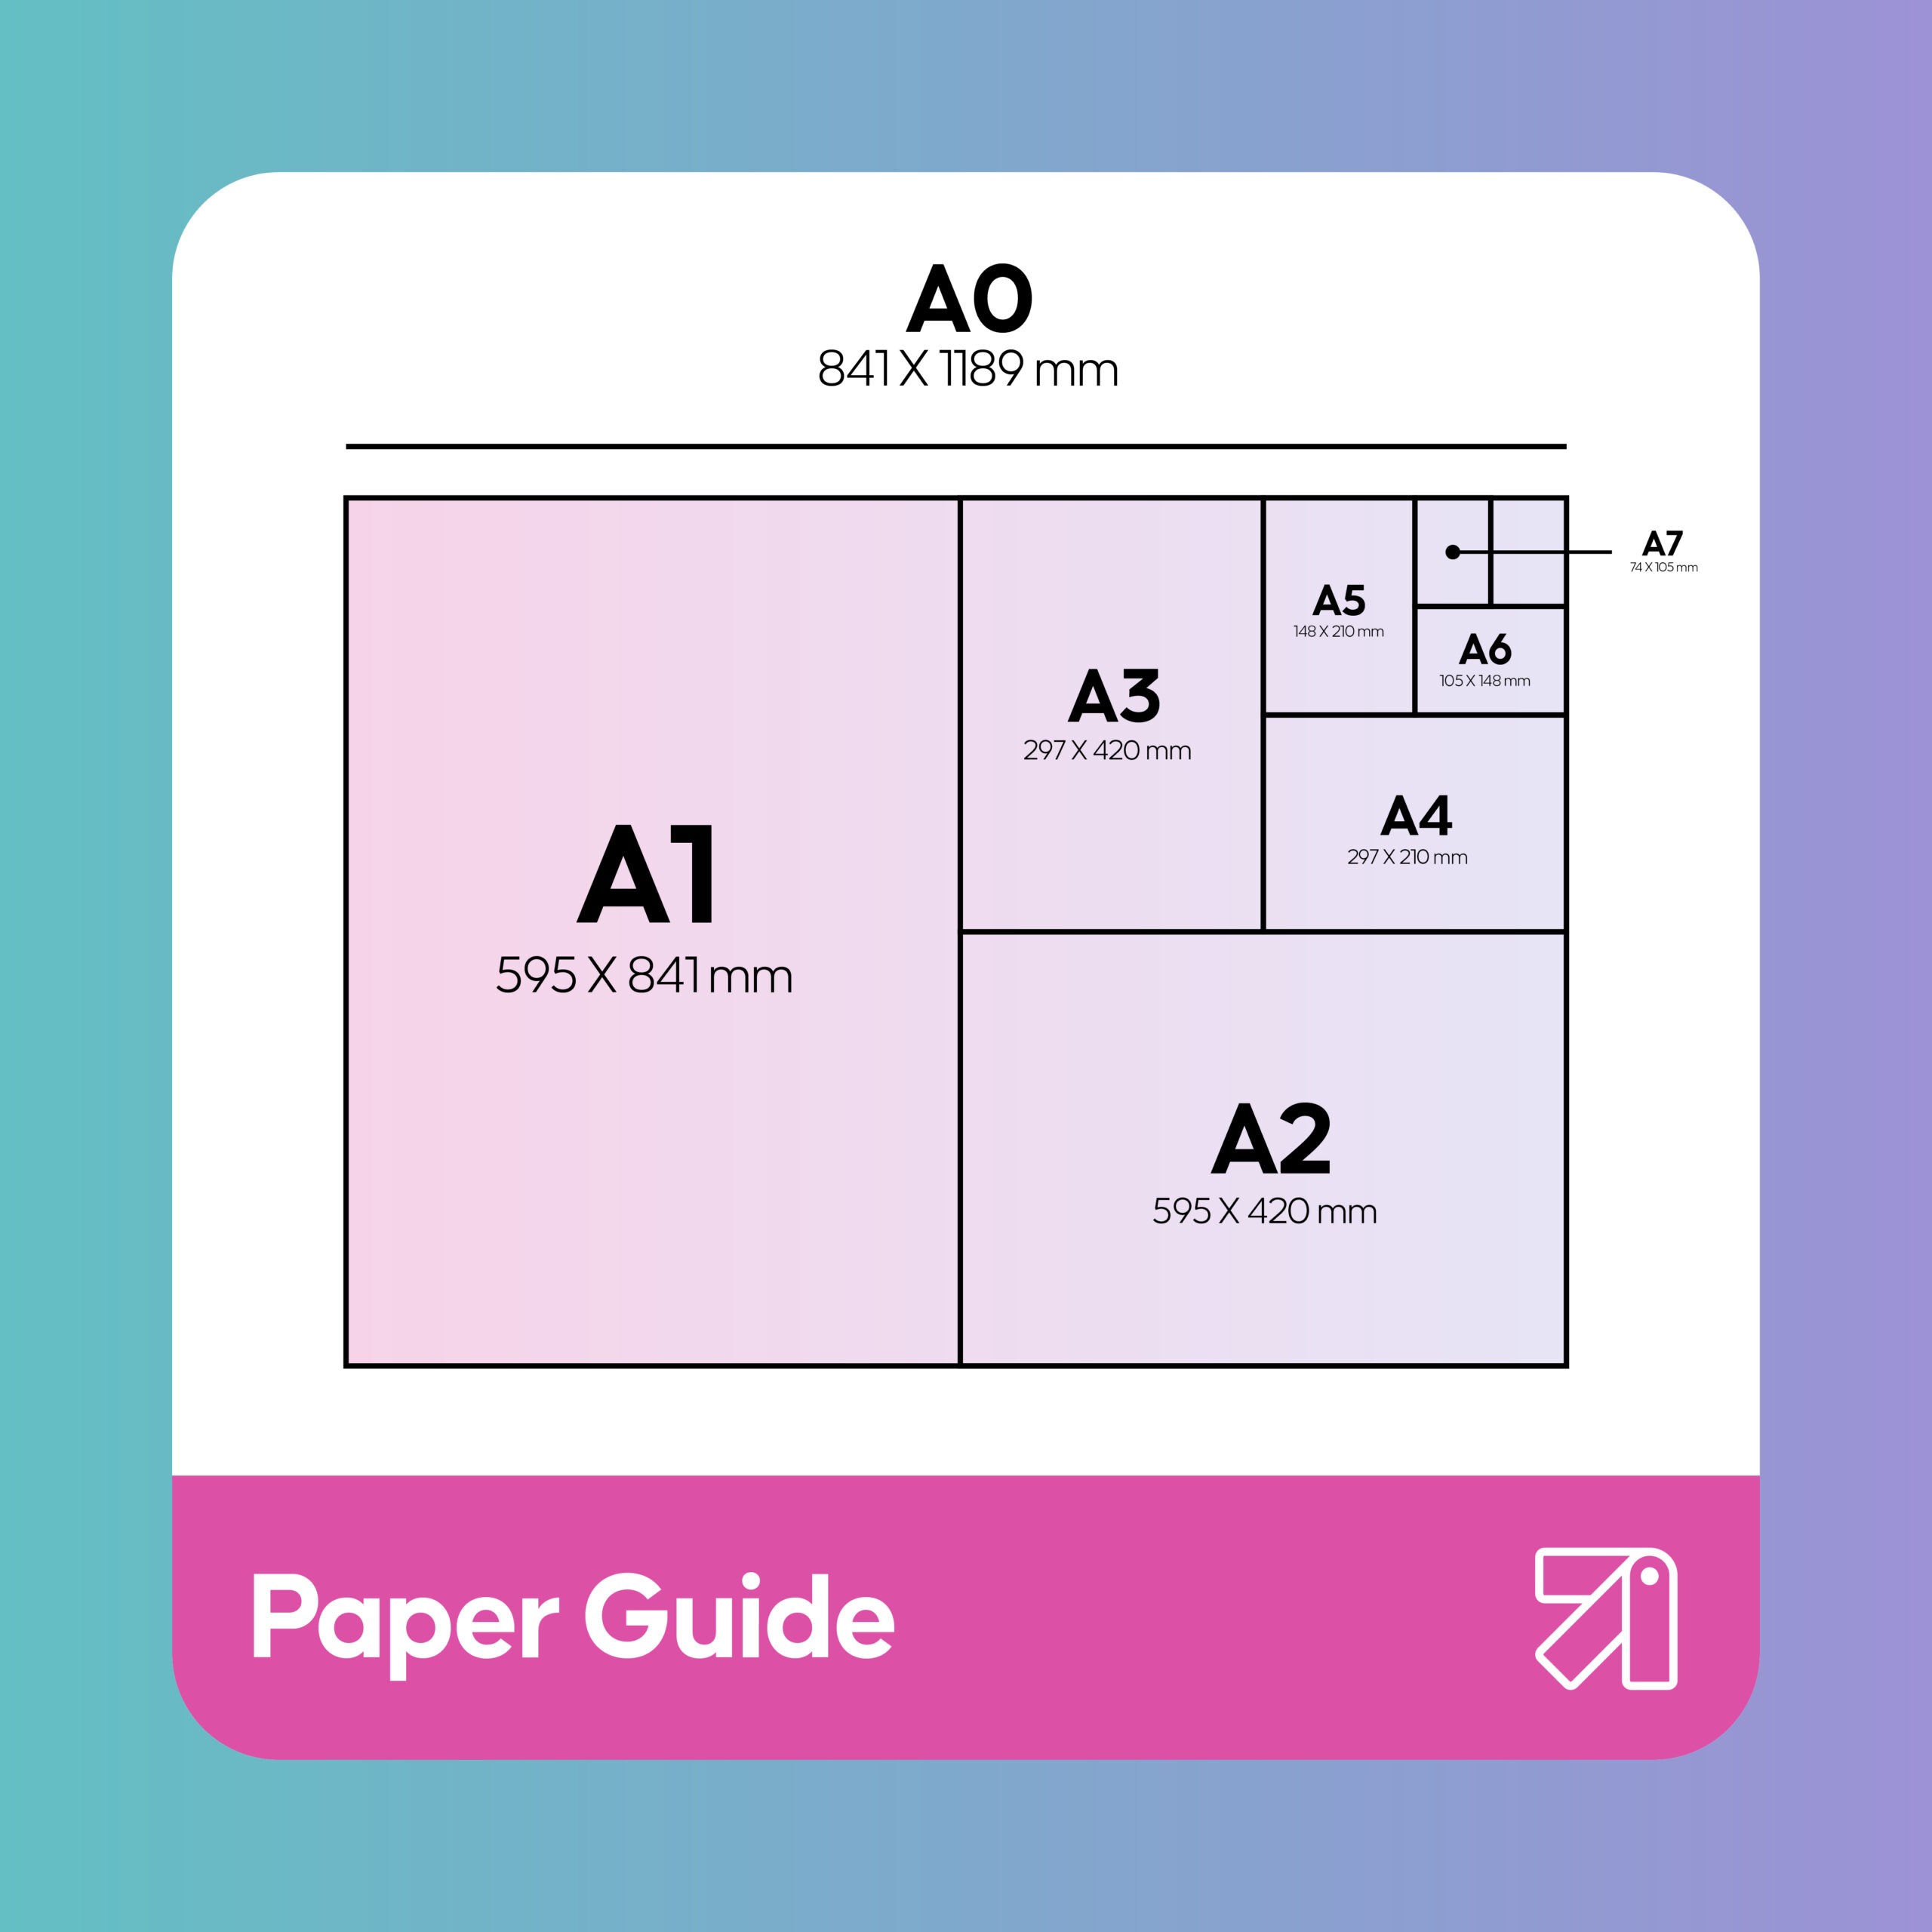 Paper Sizes, Types and Weights Guide